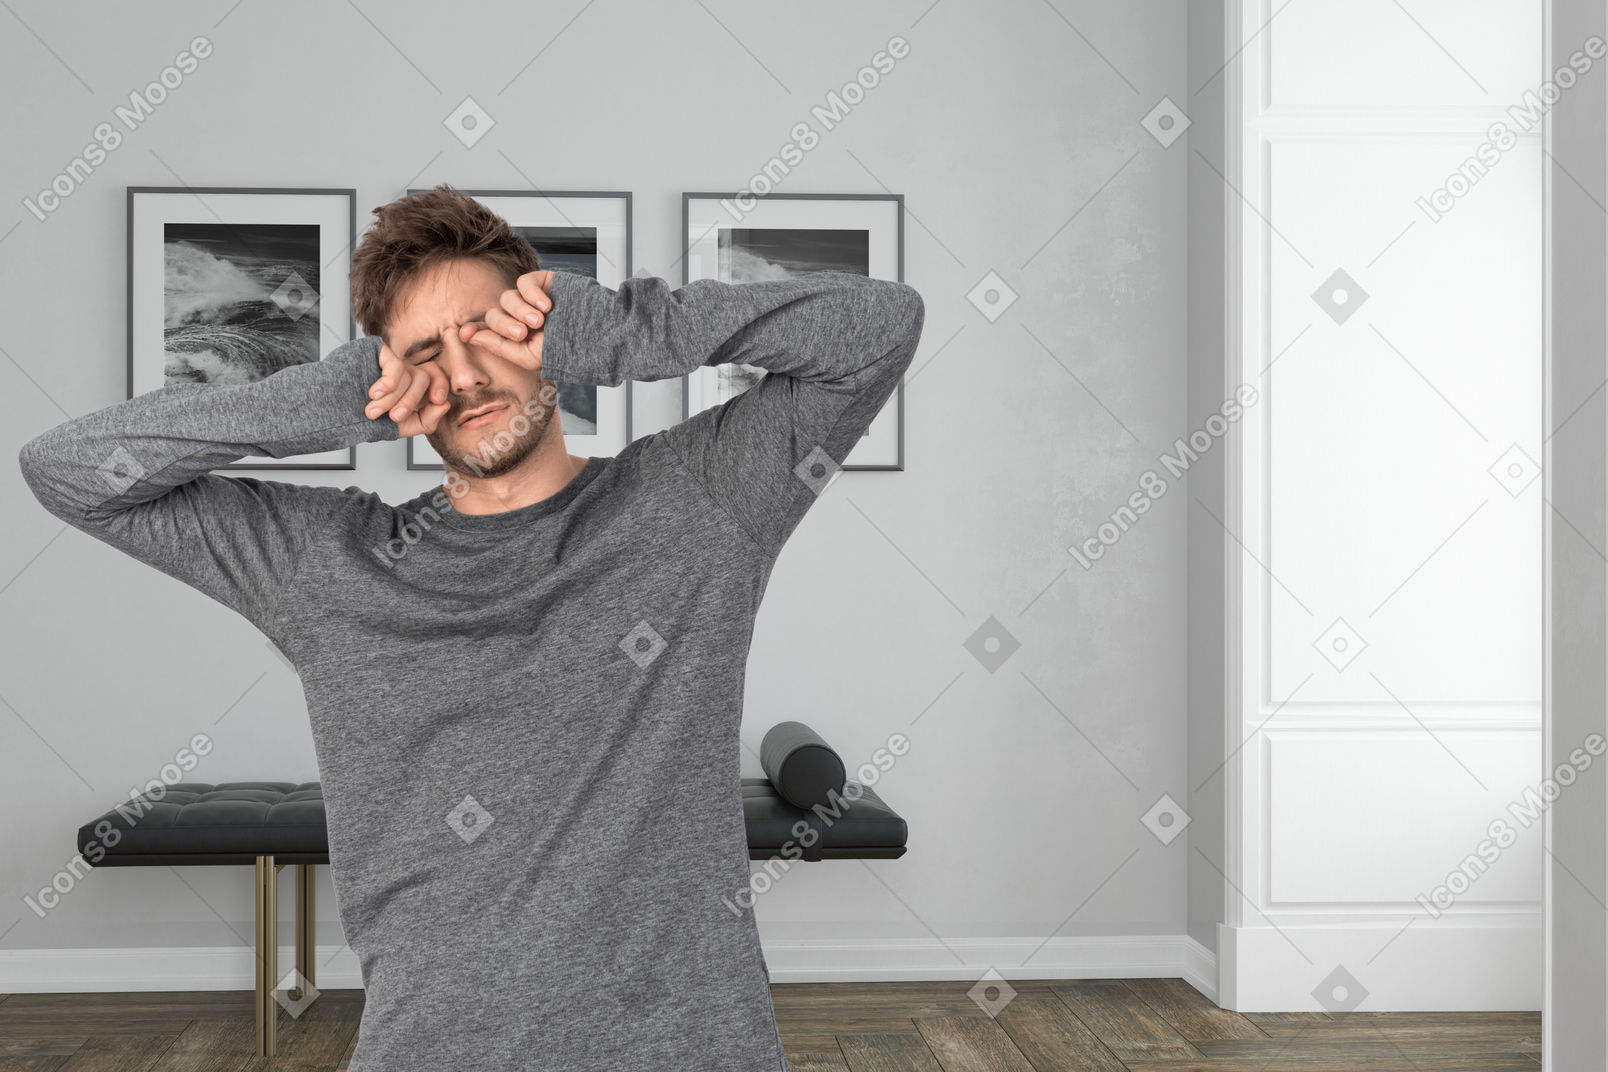 Tired young man rubbing his eyes